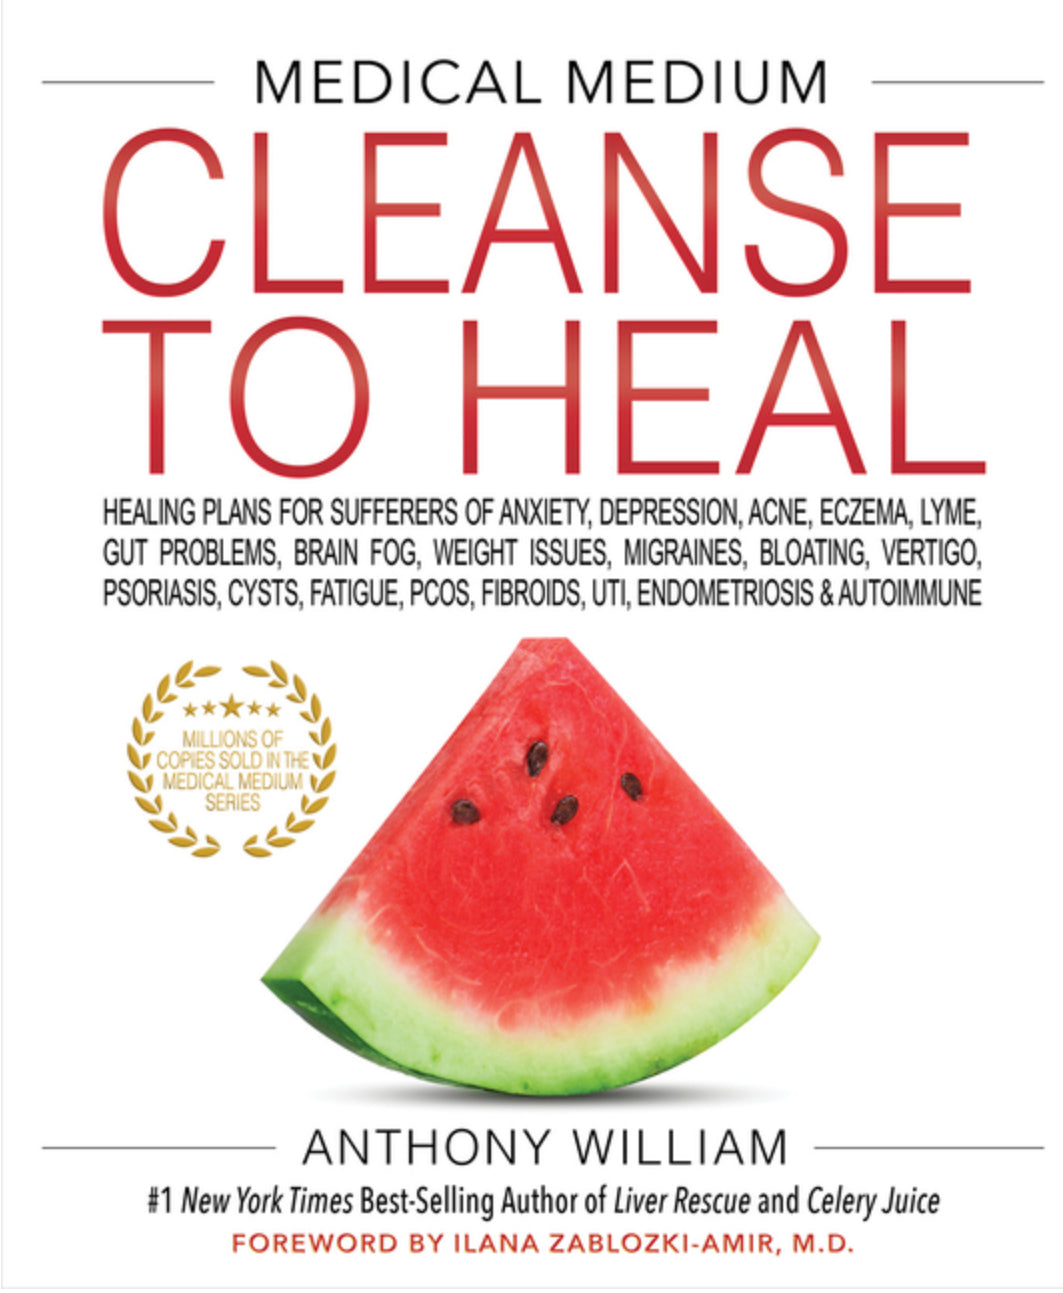 Medical Medium: Cleanse to Heal